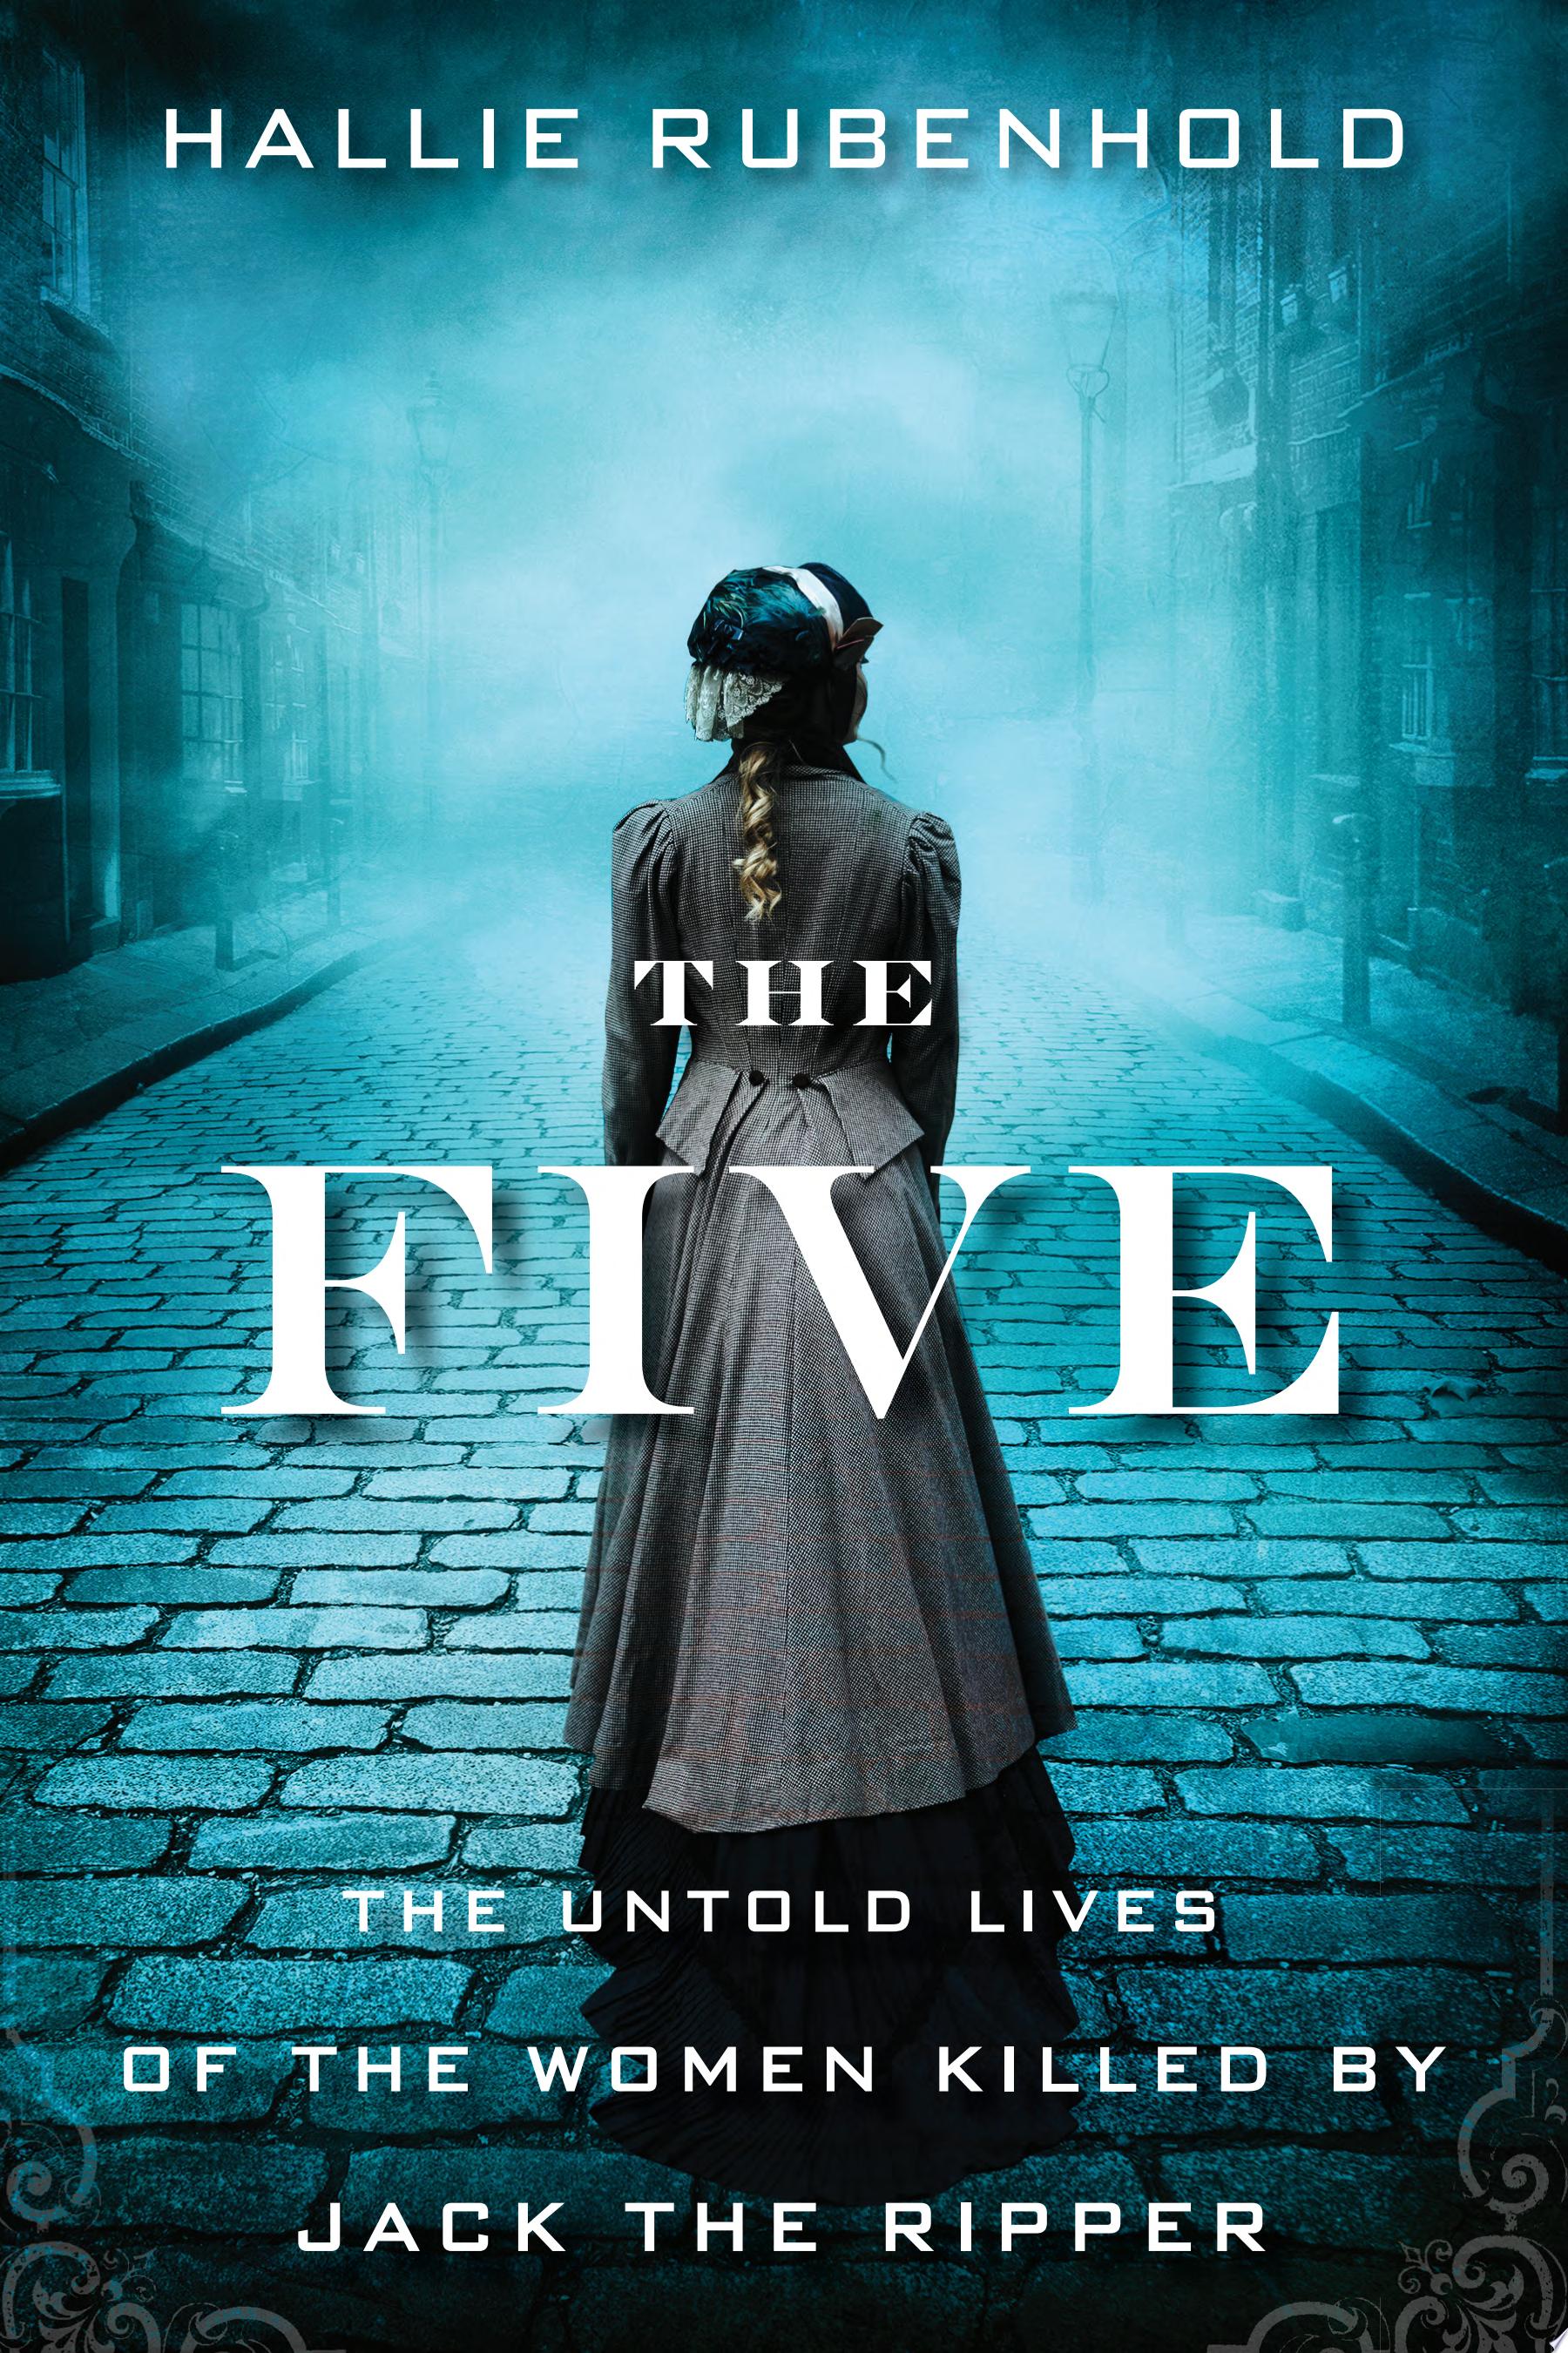 Image for "The Five"